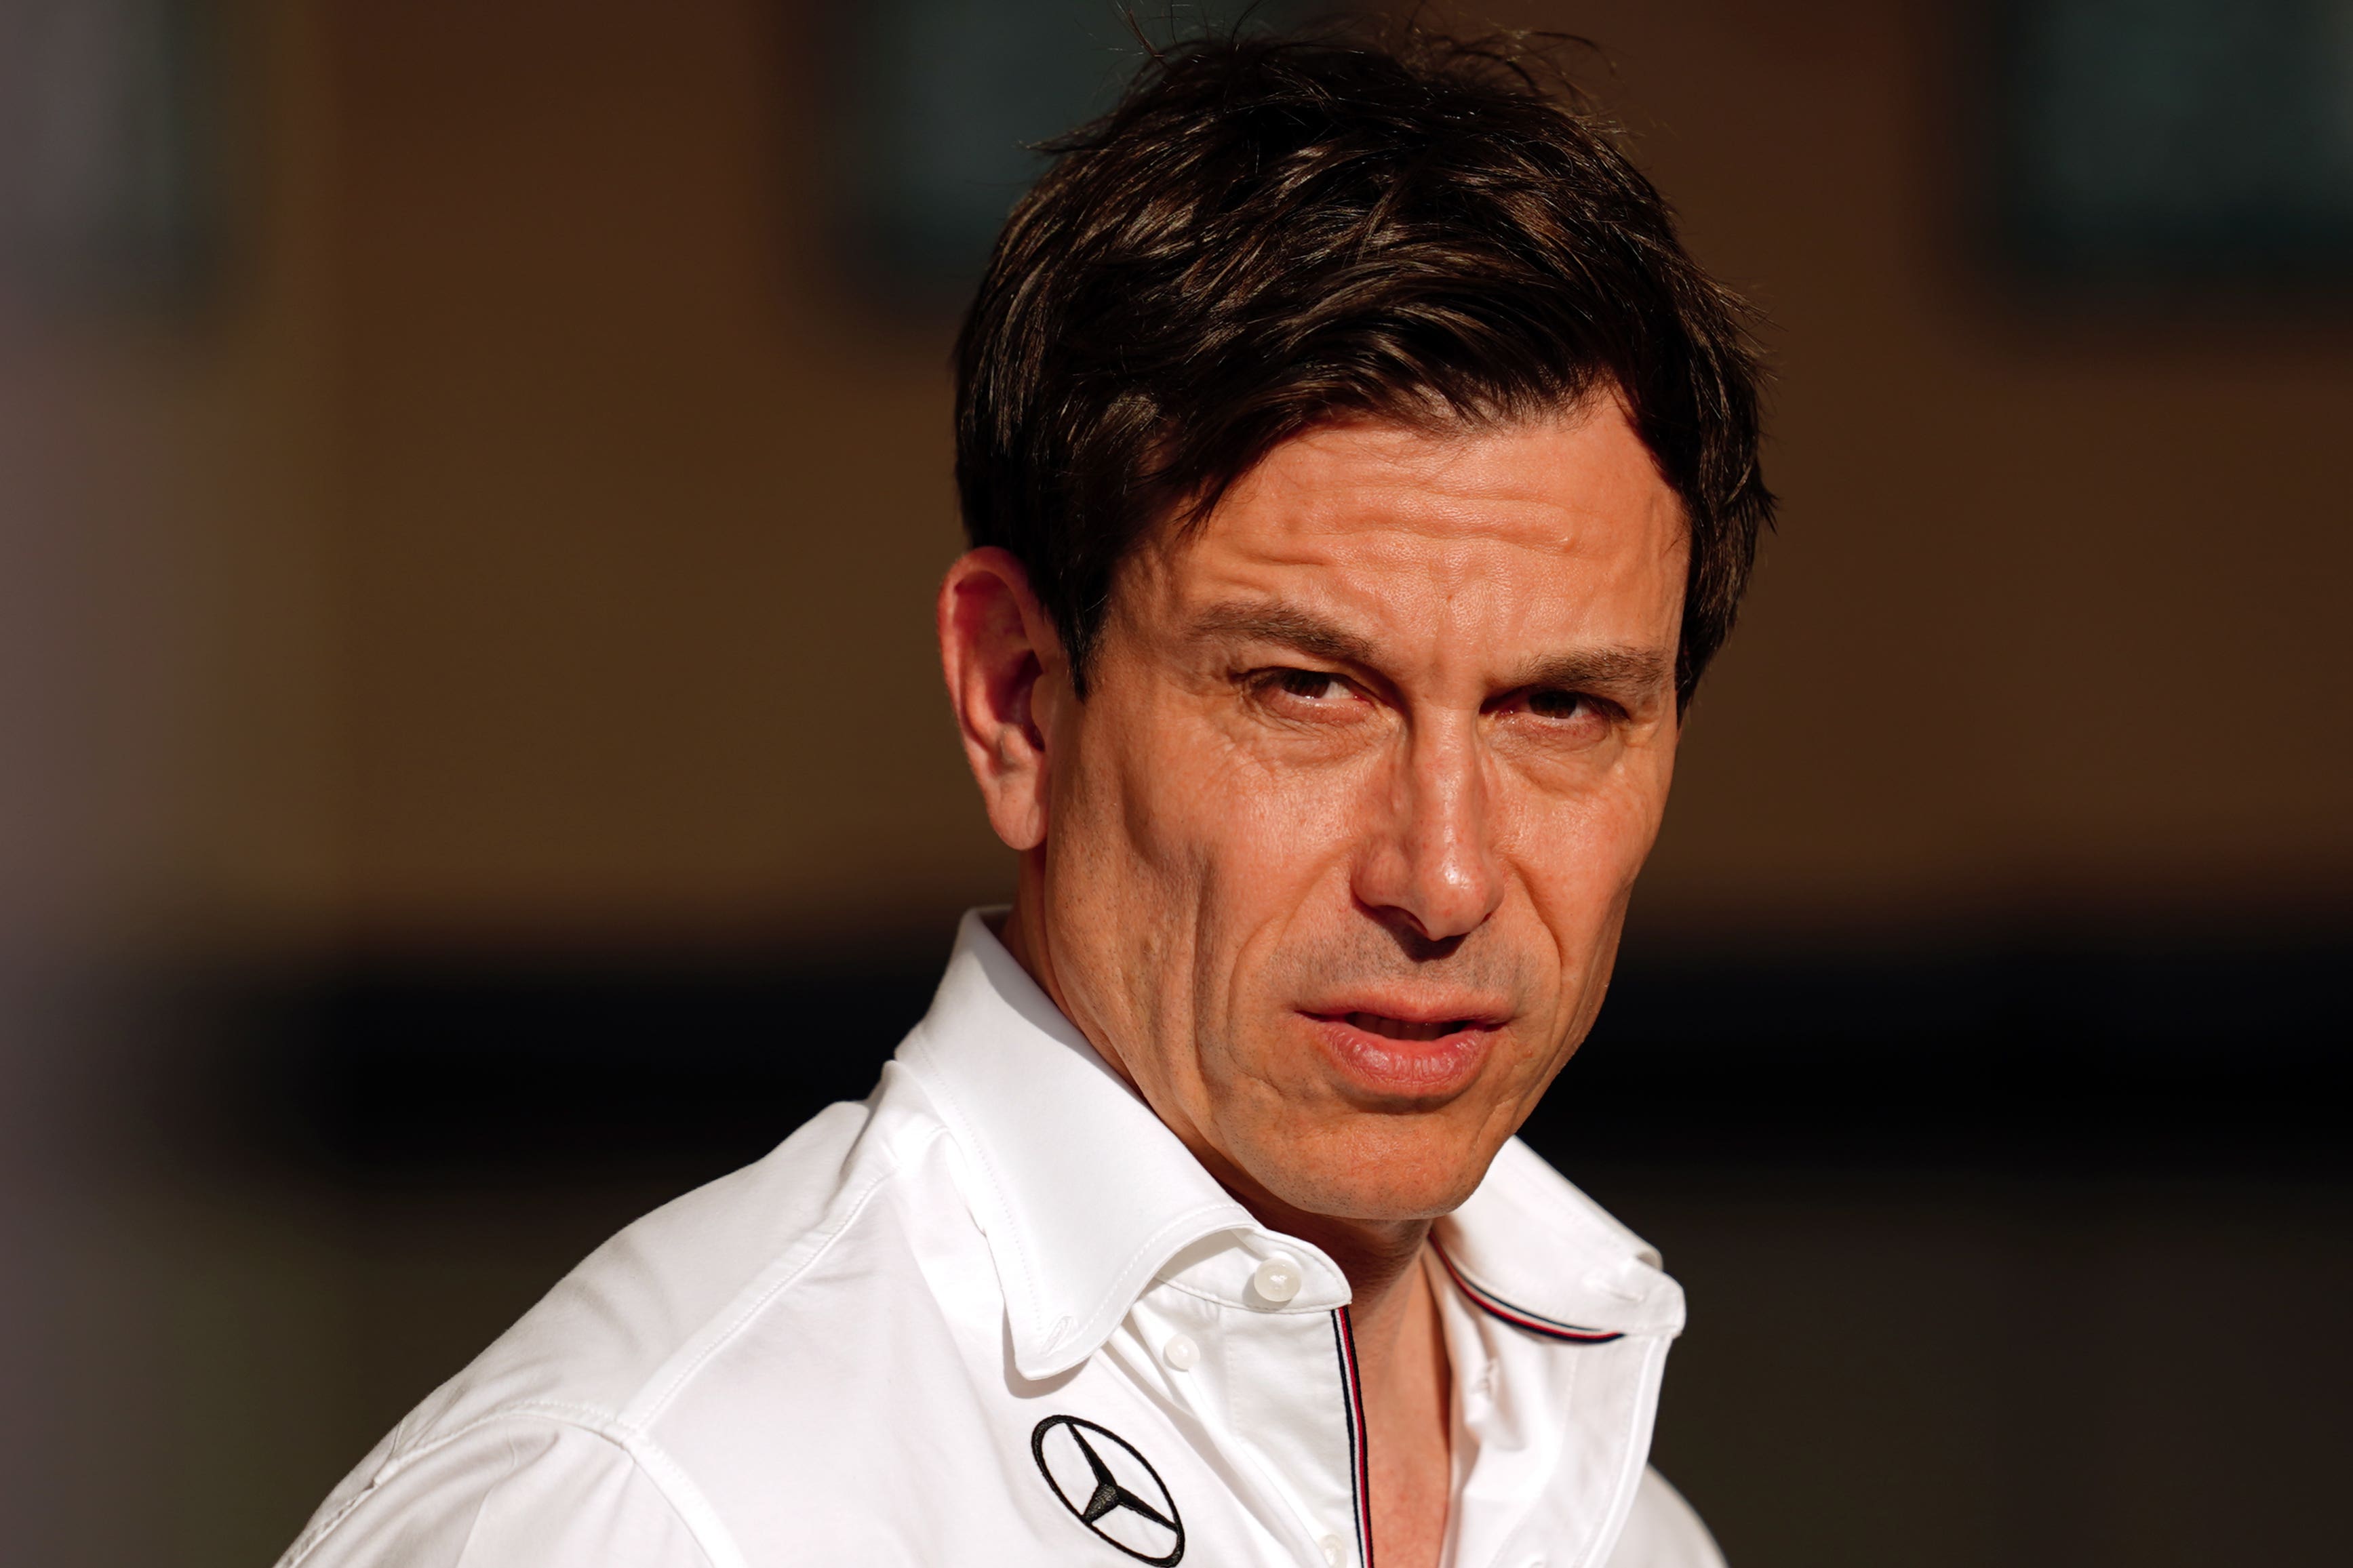 Mercedes boss Toto Wolff said he is a legal exchange with the FIA